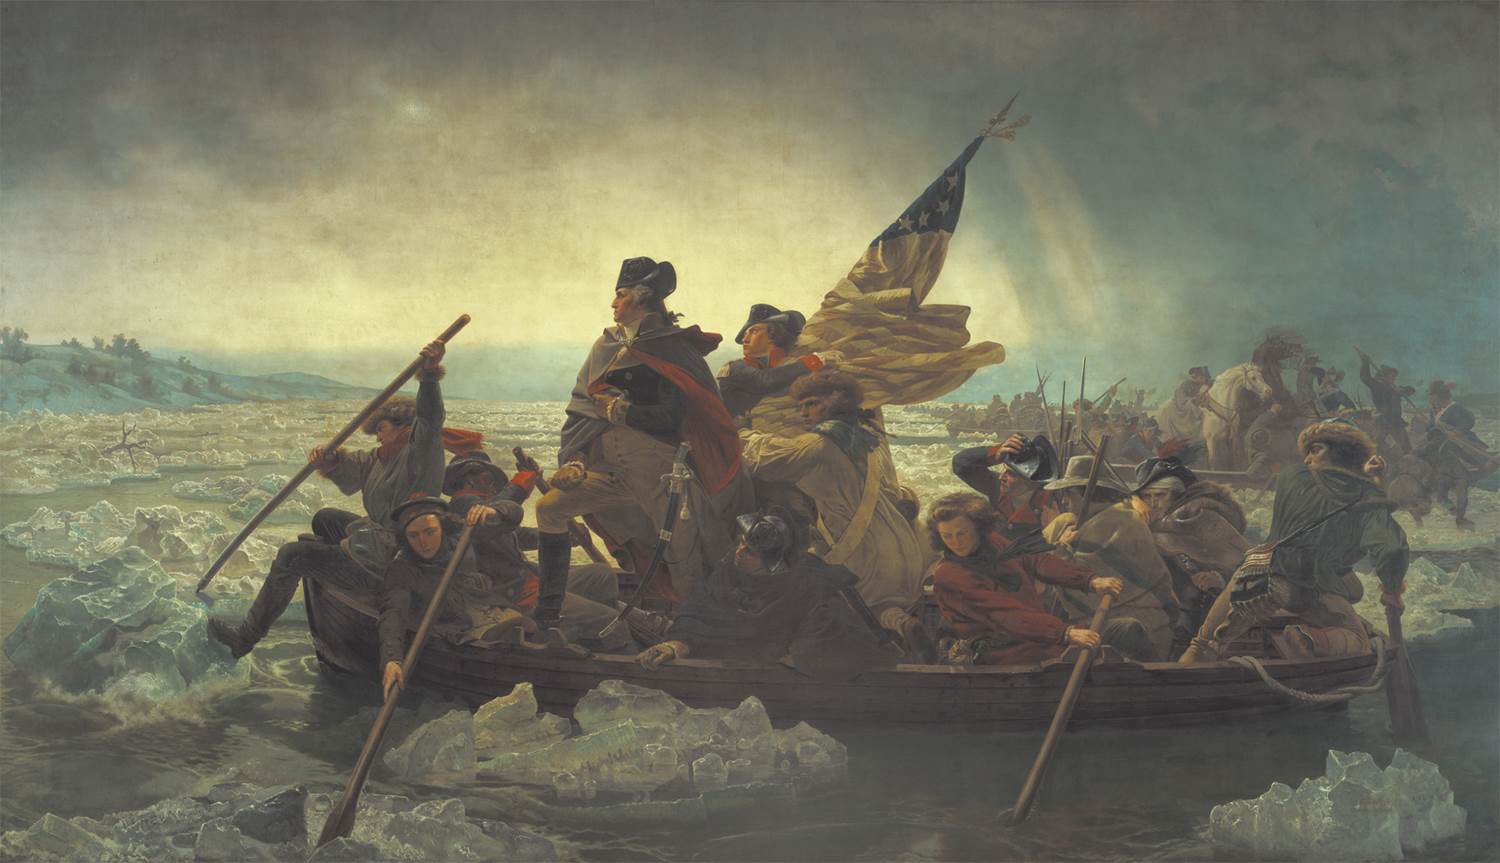 Emanuel Leutze’s Washington Crossing the Delaware (1851) is riddled with historical inaccuracies, mo